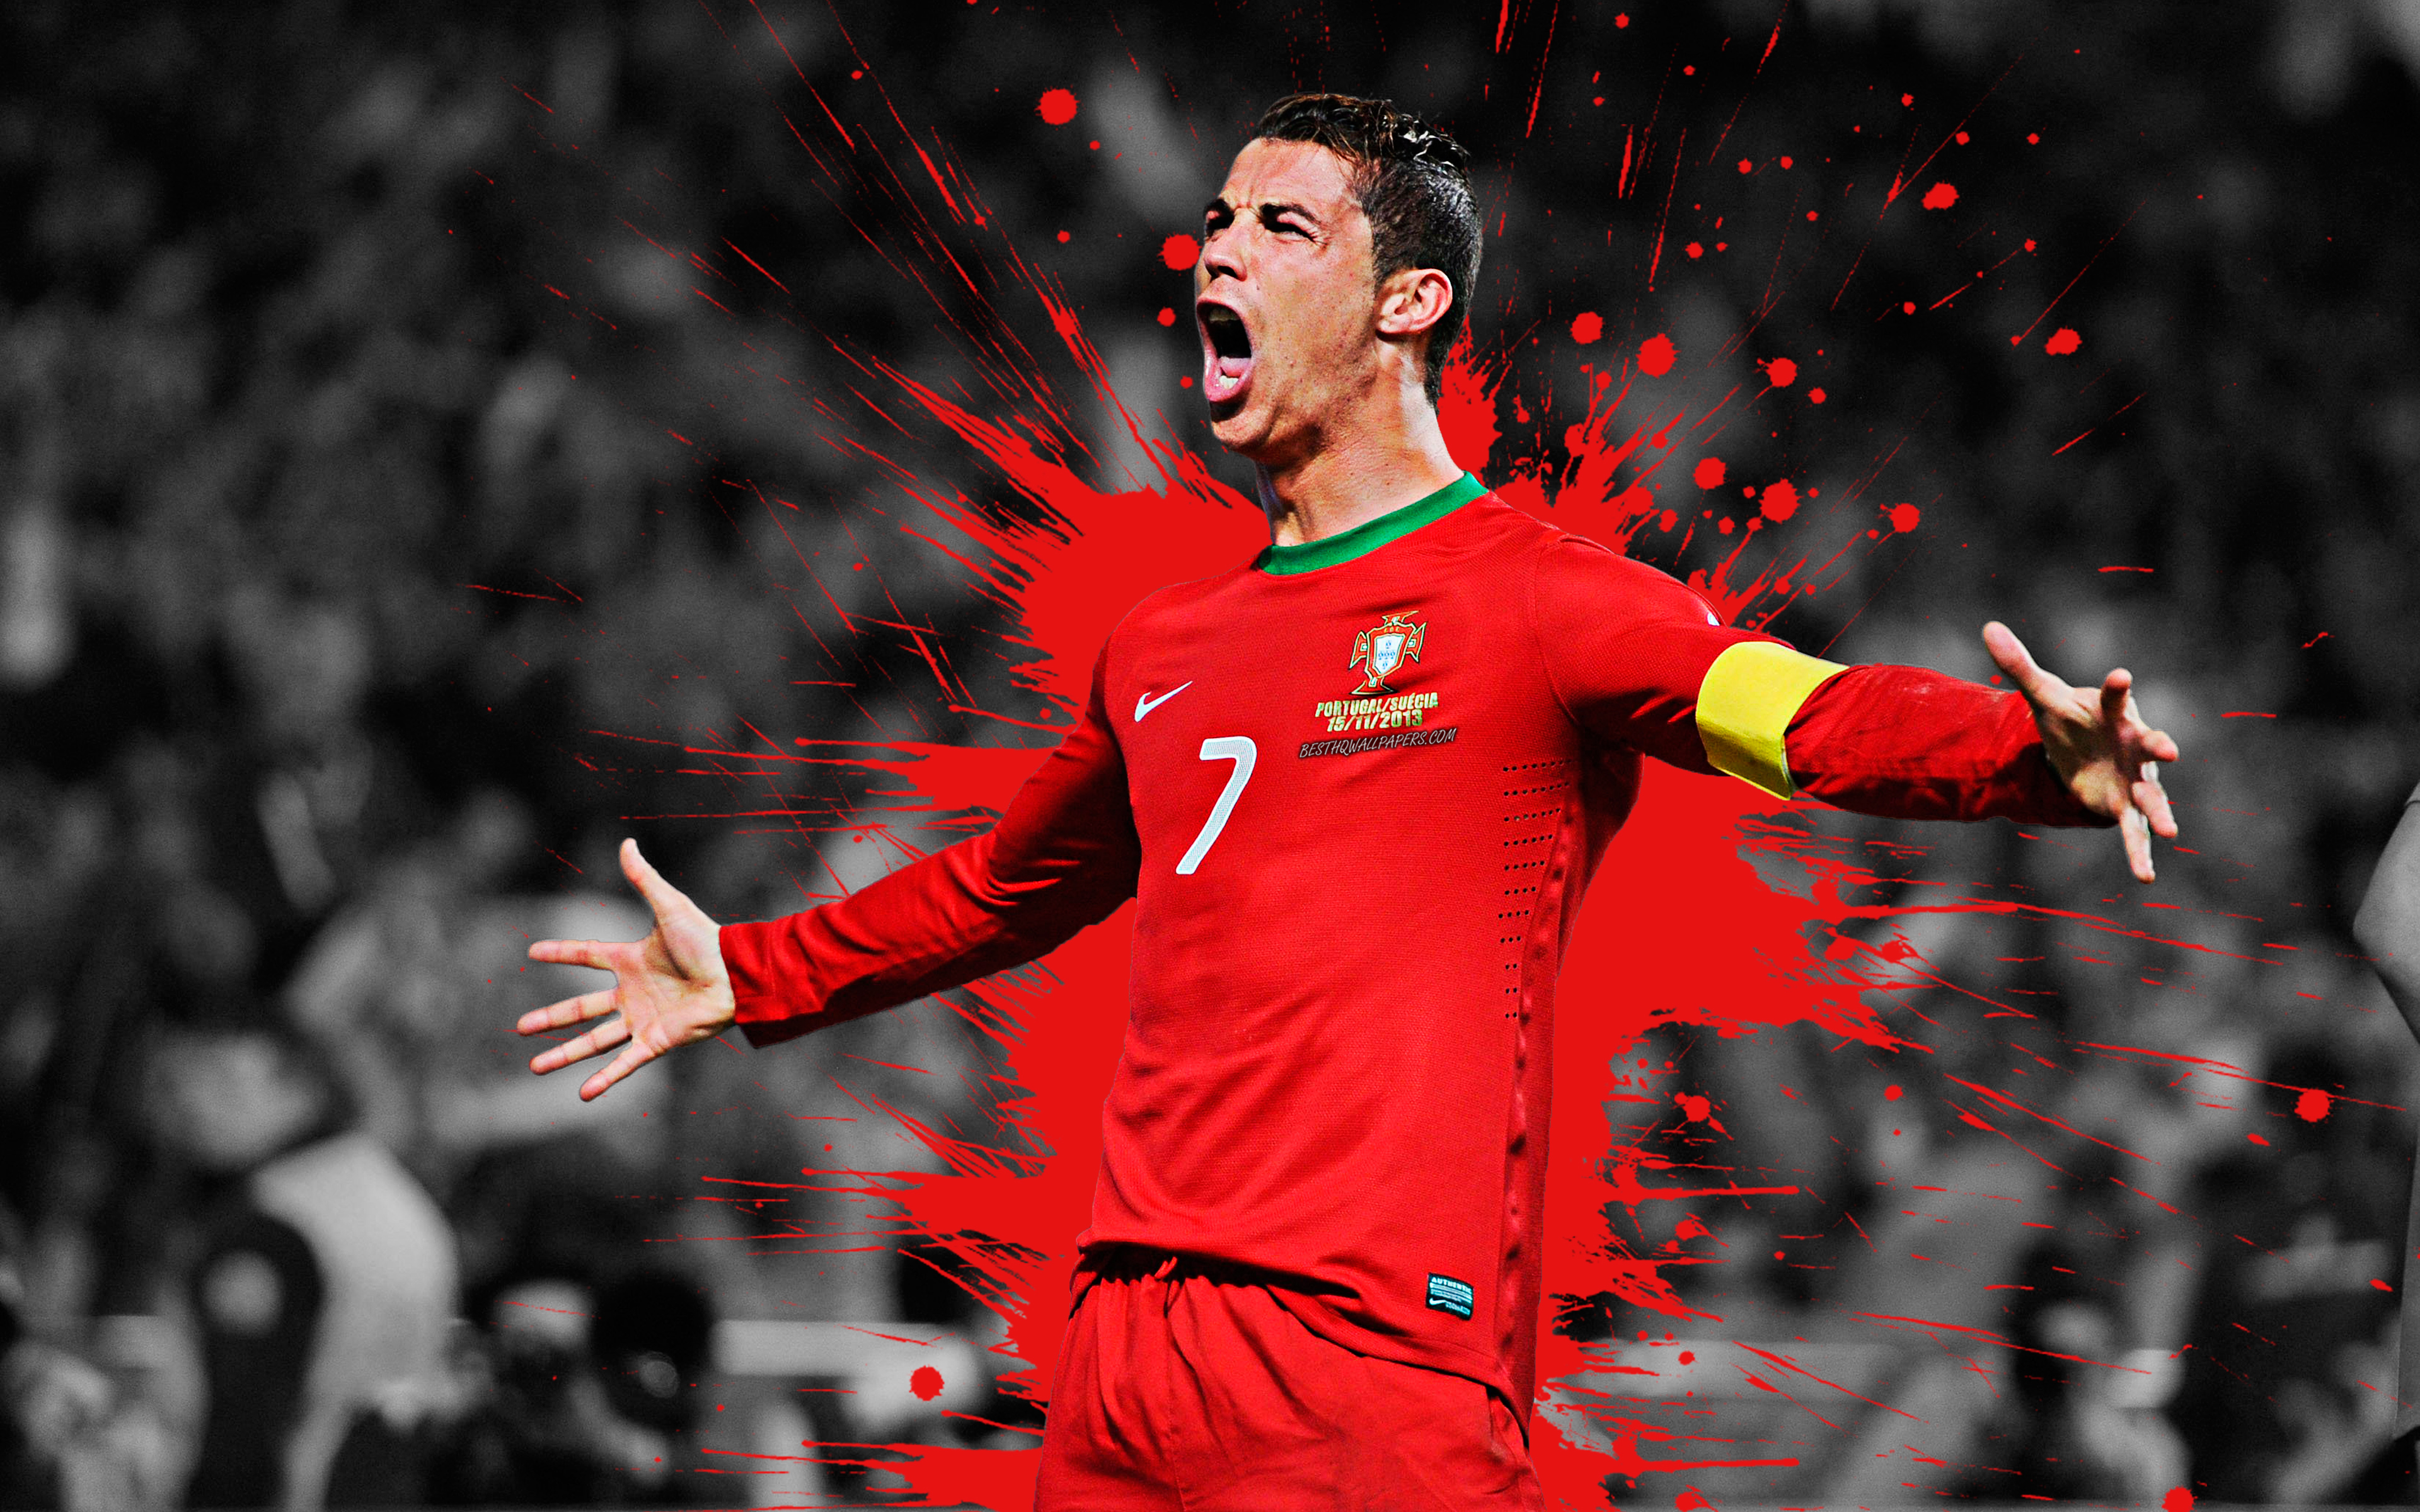 Download wallpapers cristiano ronaldo for desktop free High Quality HD  pictures wallpapers  Page 1